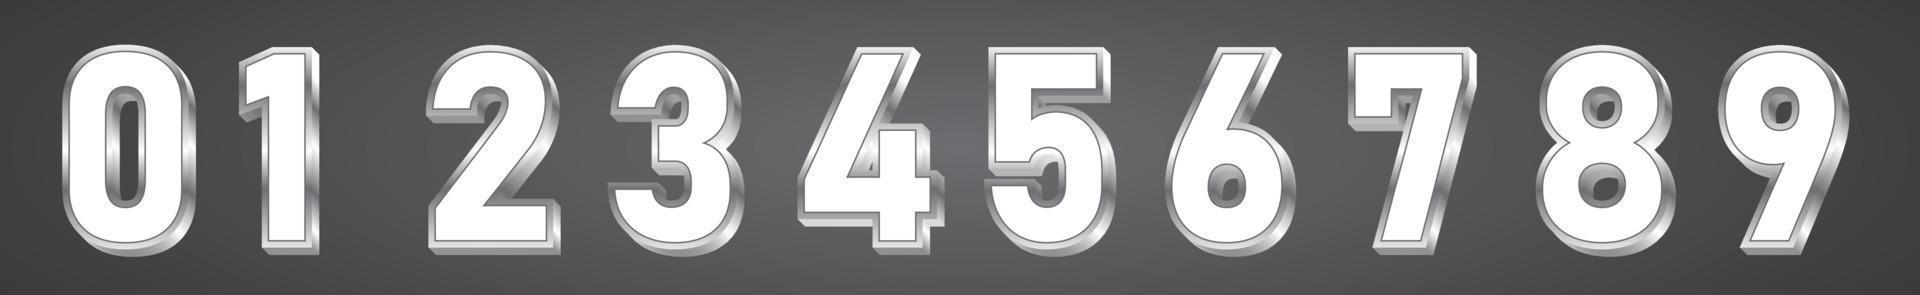 Numbers 3D letters 3D numbers number fonts gradation strength steel vector